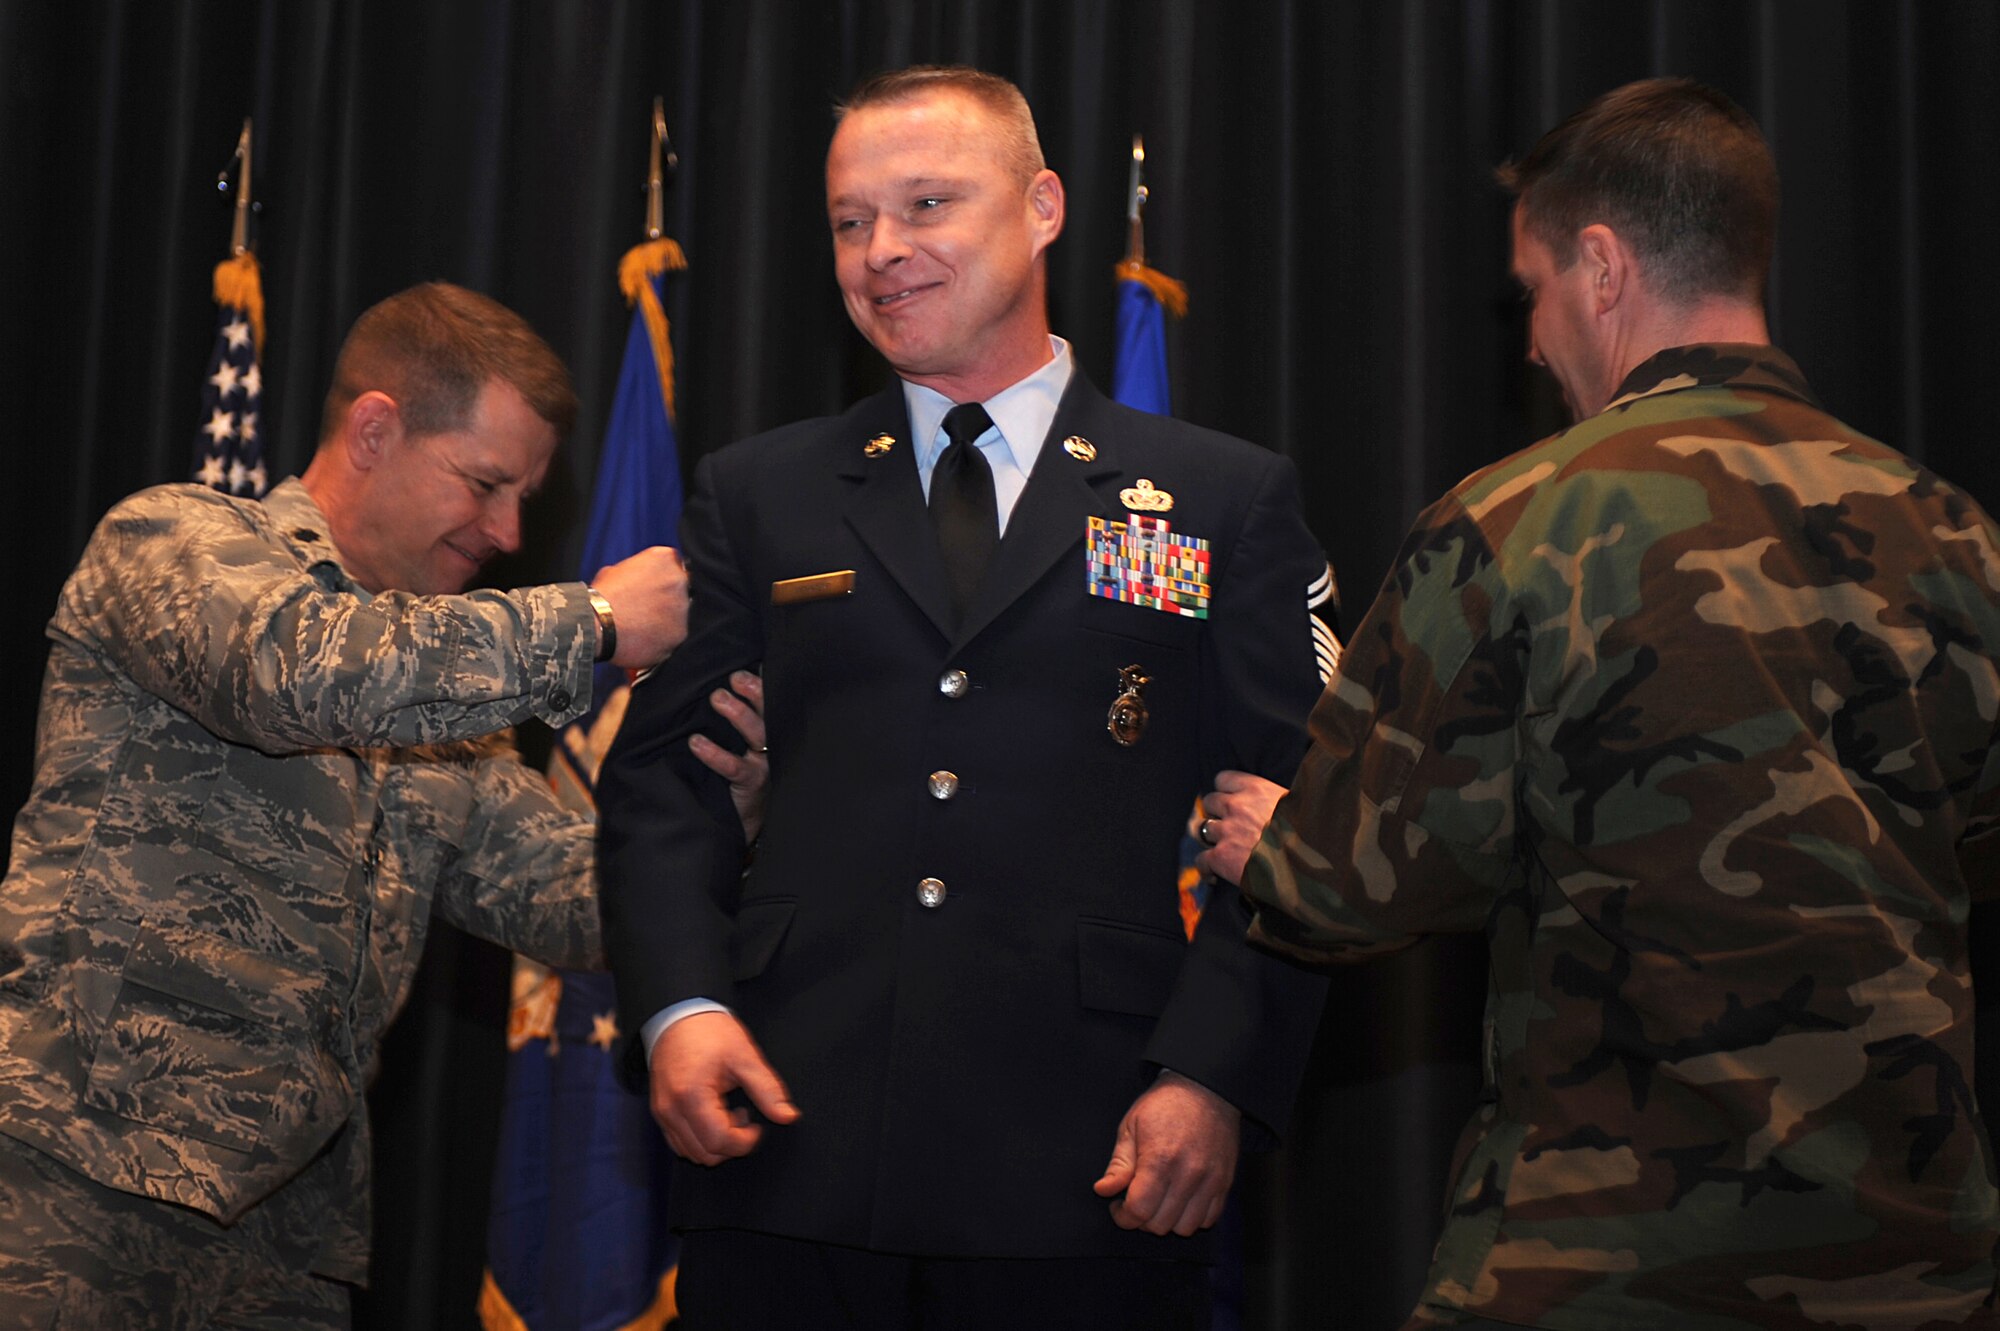 Senior Master Sgt. Scott Pepper, 421st Combat Training Squadron superintendent, gets his newly promoted senior stripes tacked on by Lt. Col. Mitchell Monroe, 421st CTS commander, and Lt. Col. Matthew Lacy, 421st CTS director of operations, during the U.S Air Force Expeditionary Center promotion ceremony Jan. 8, 2009, on Fort Dix, N.J. Sergeant Pepper's effective date of promotion was Jan. 1.  (U.S. Air Force Photo/Staff Sgt. Nathan Bevier)